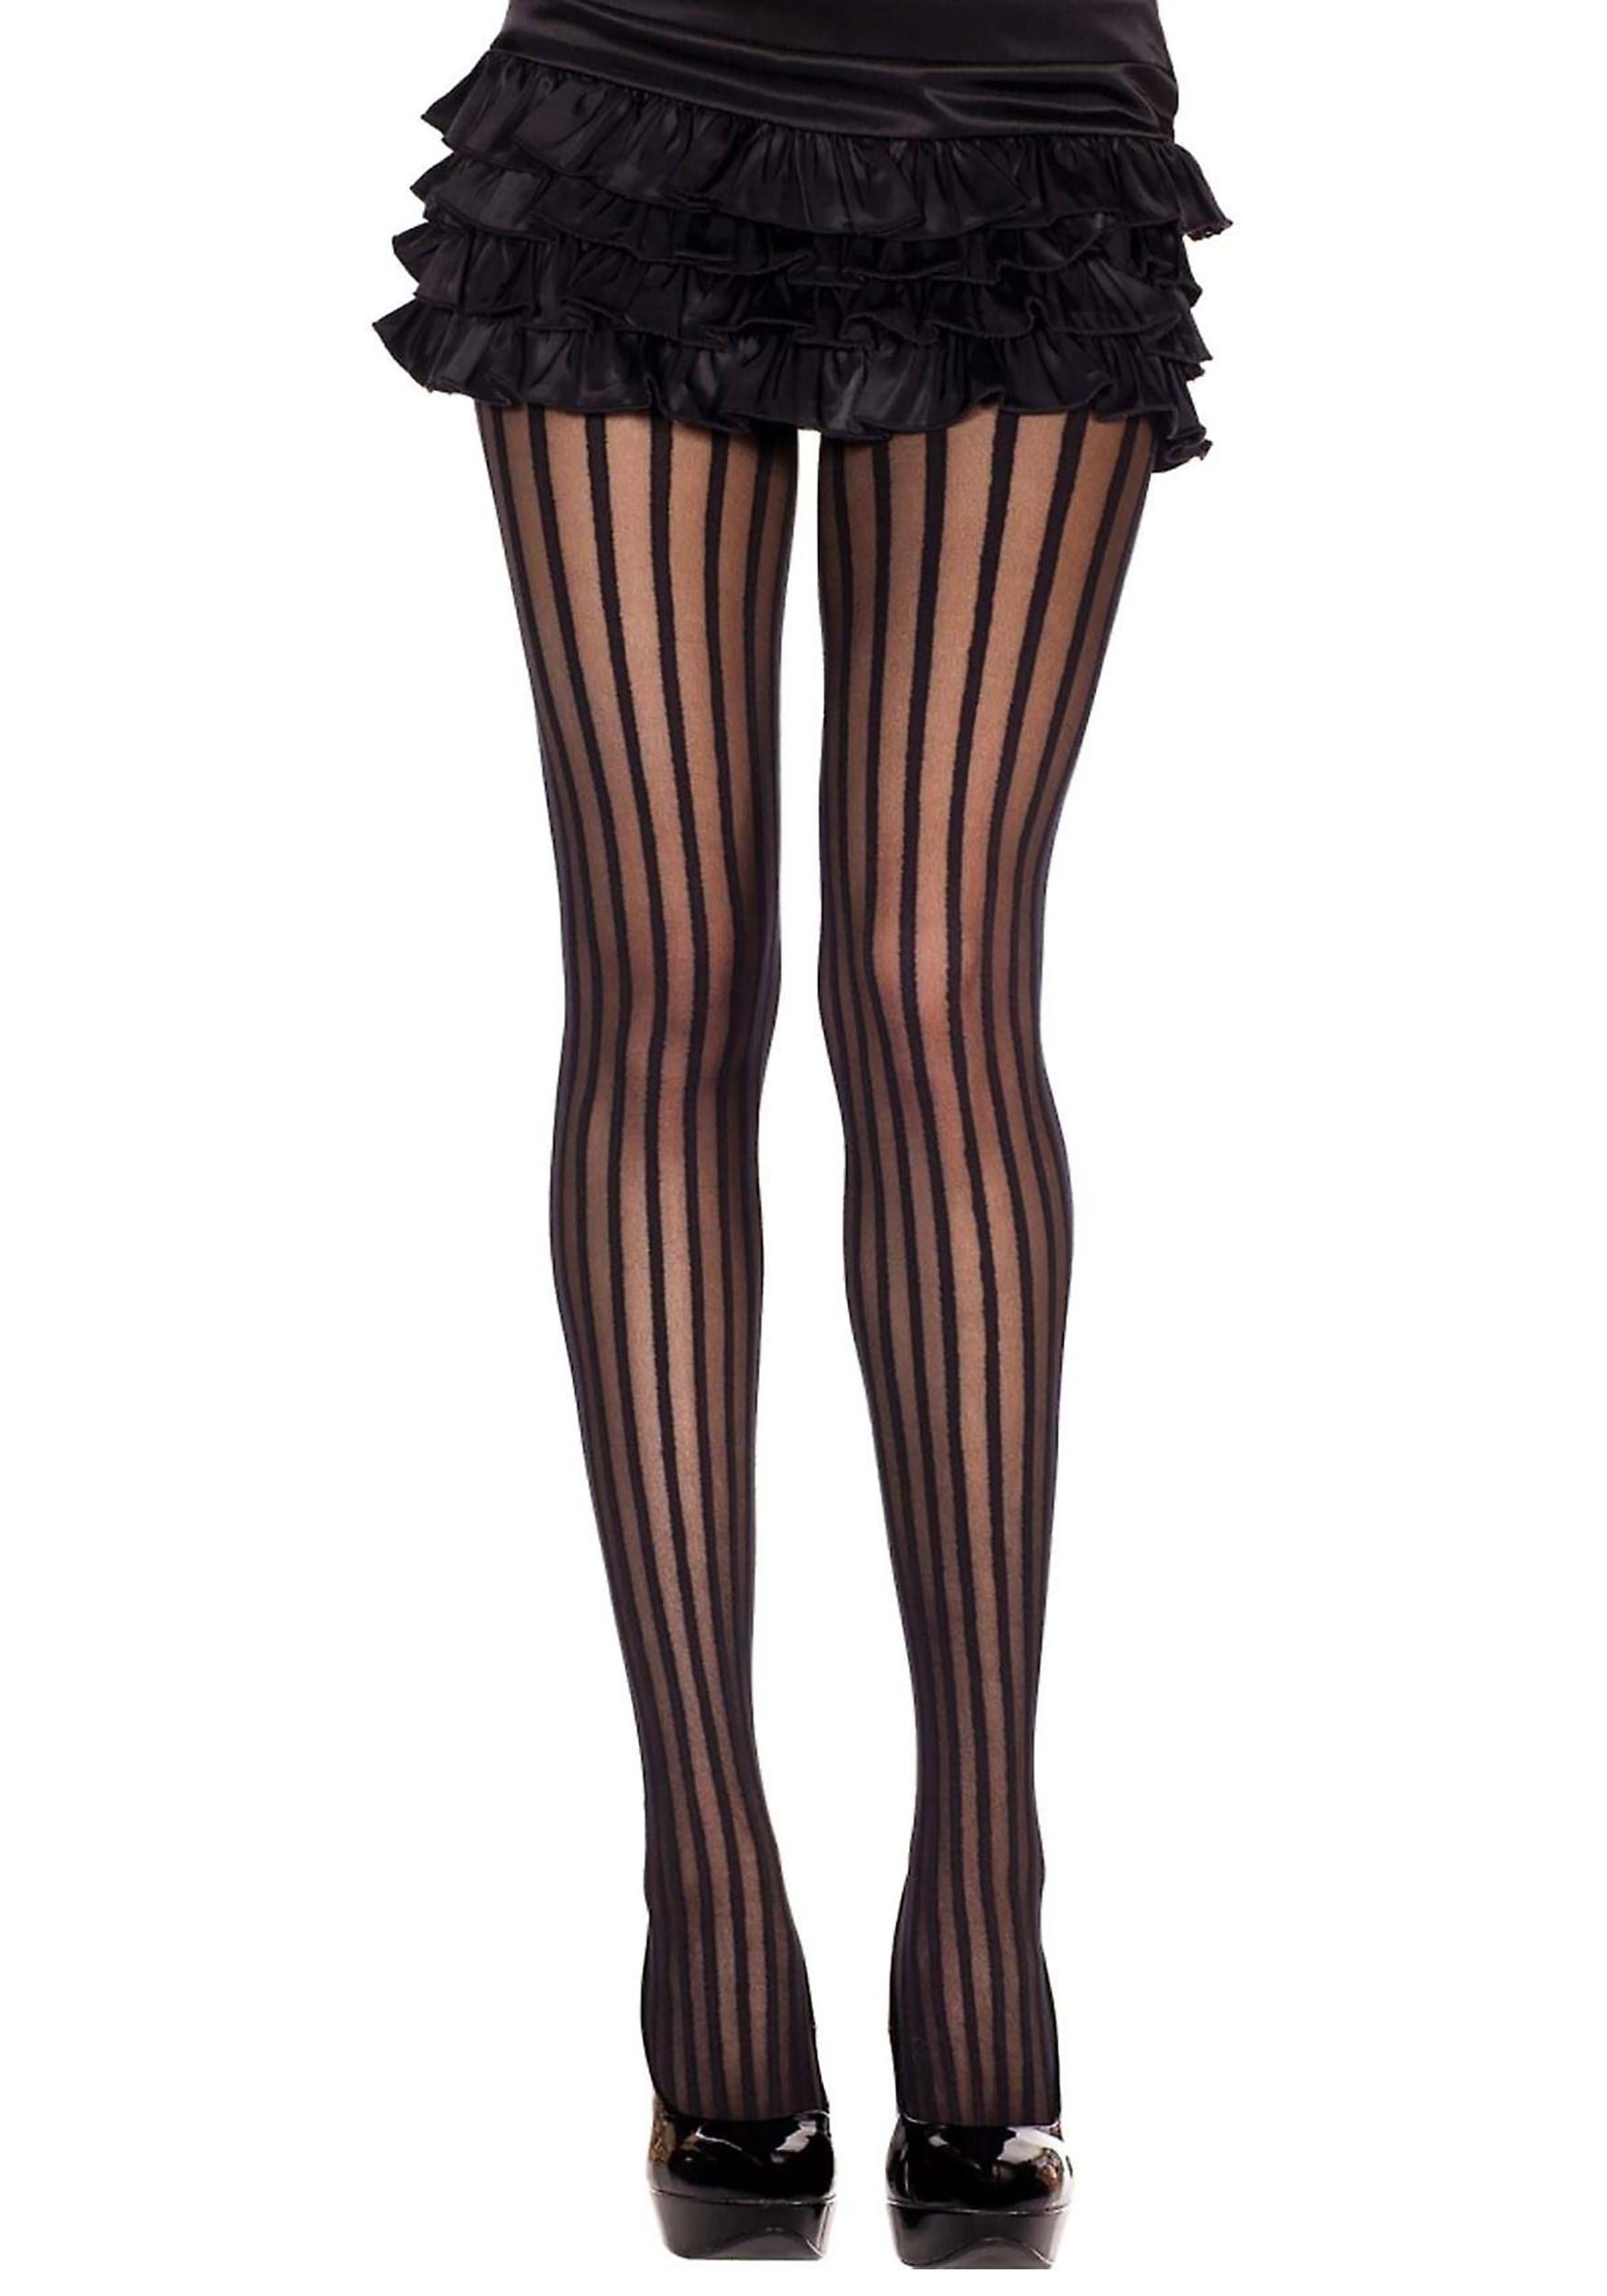 Be Wicked Women's Opaque Vertical Stripe Tights, Black/White, One Size at   Women's Clothing store